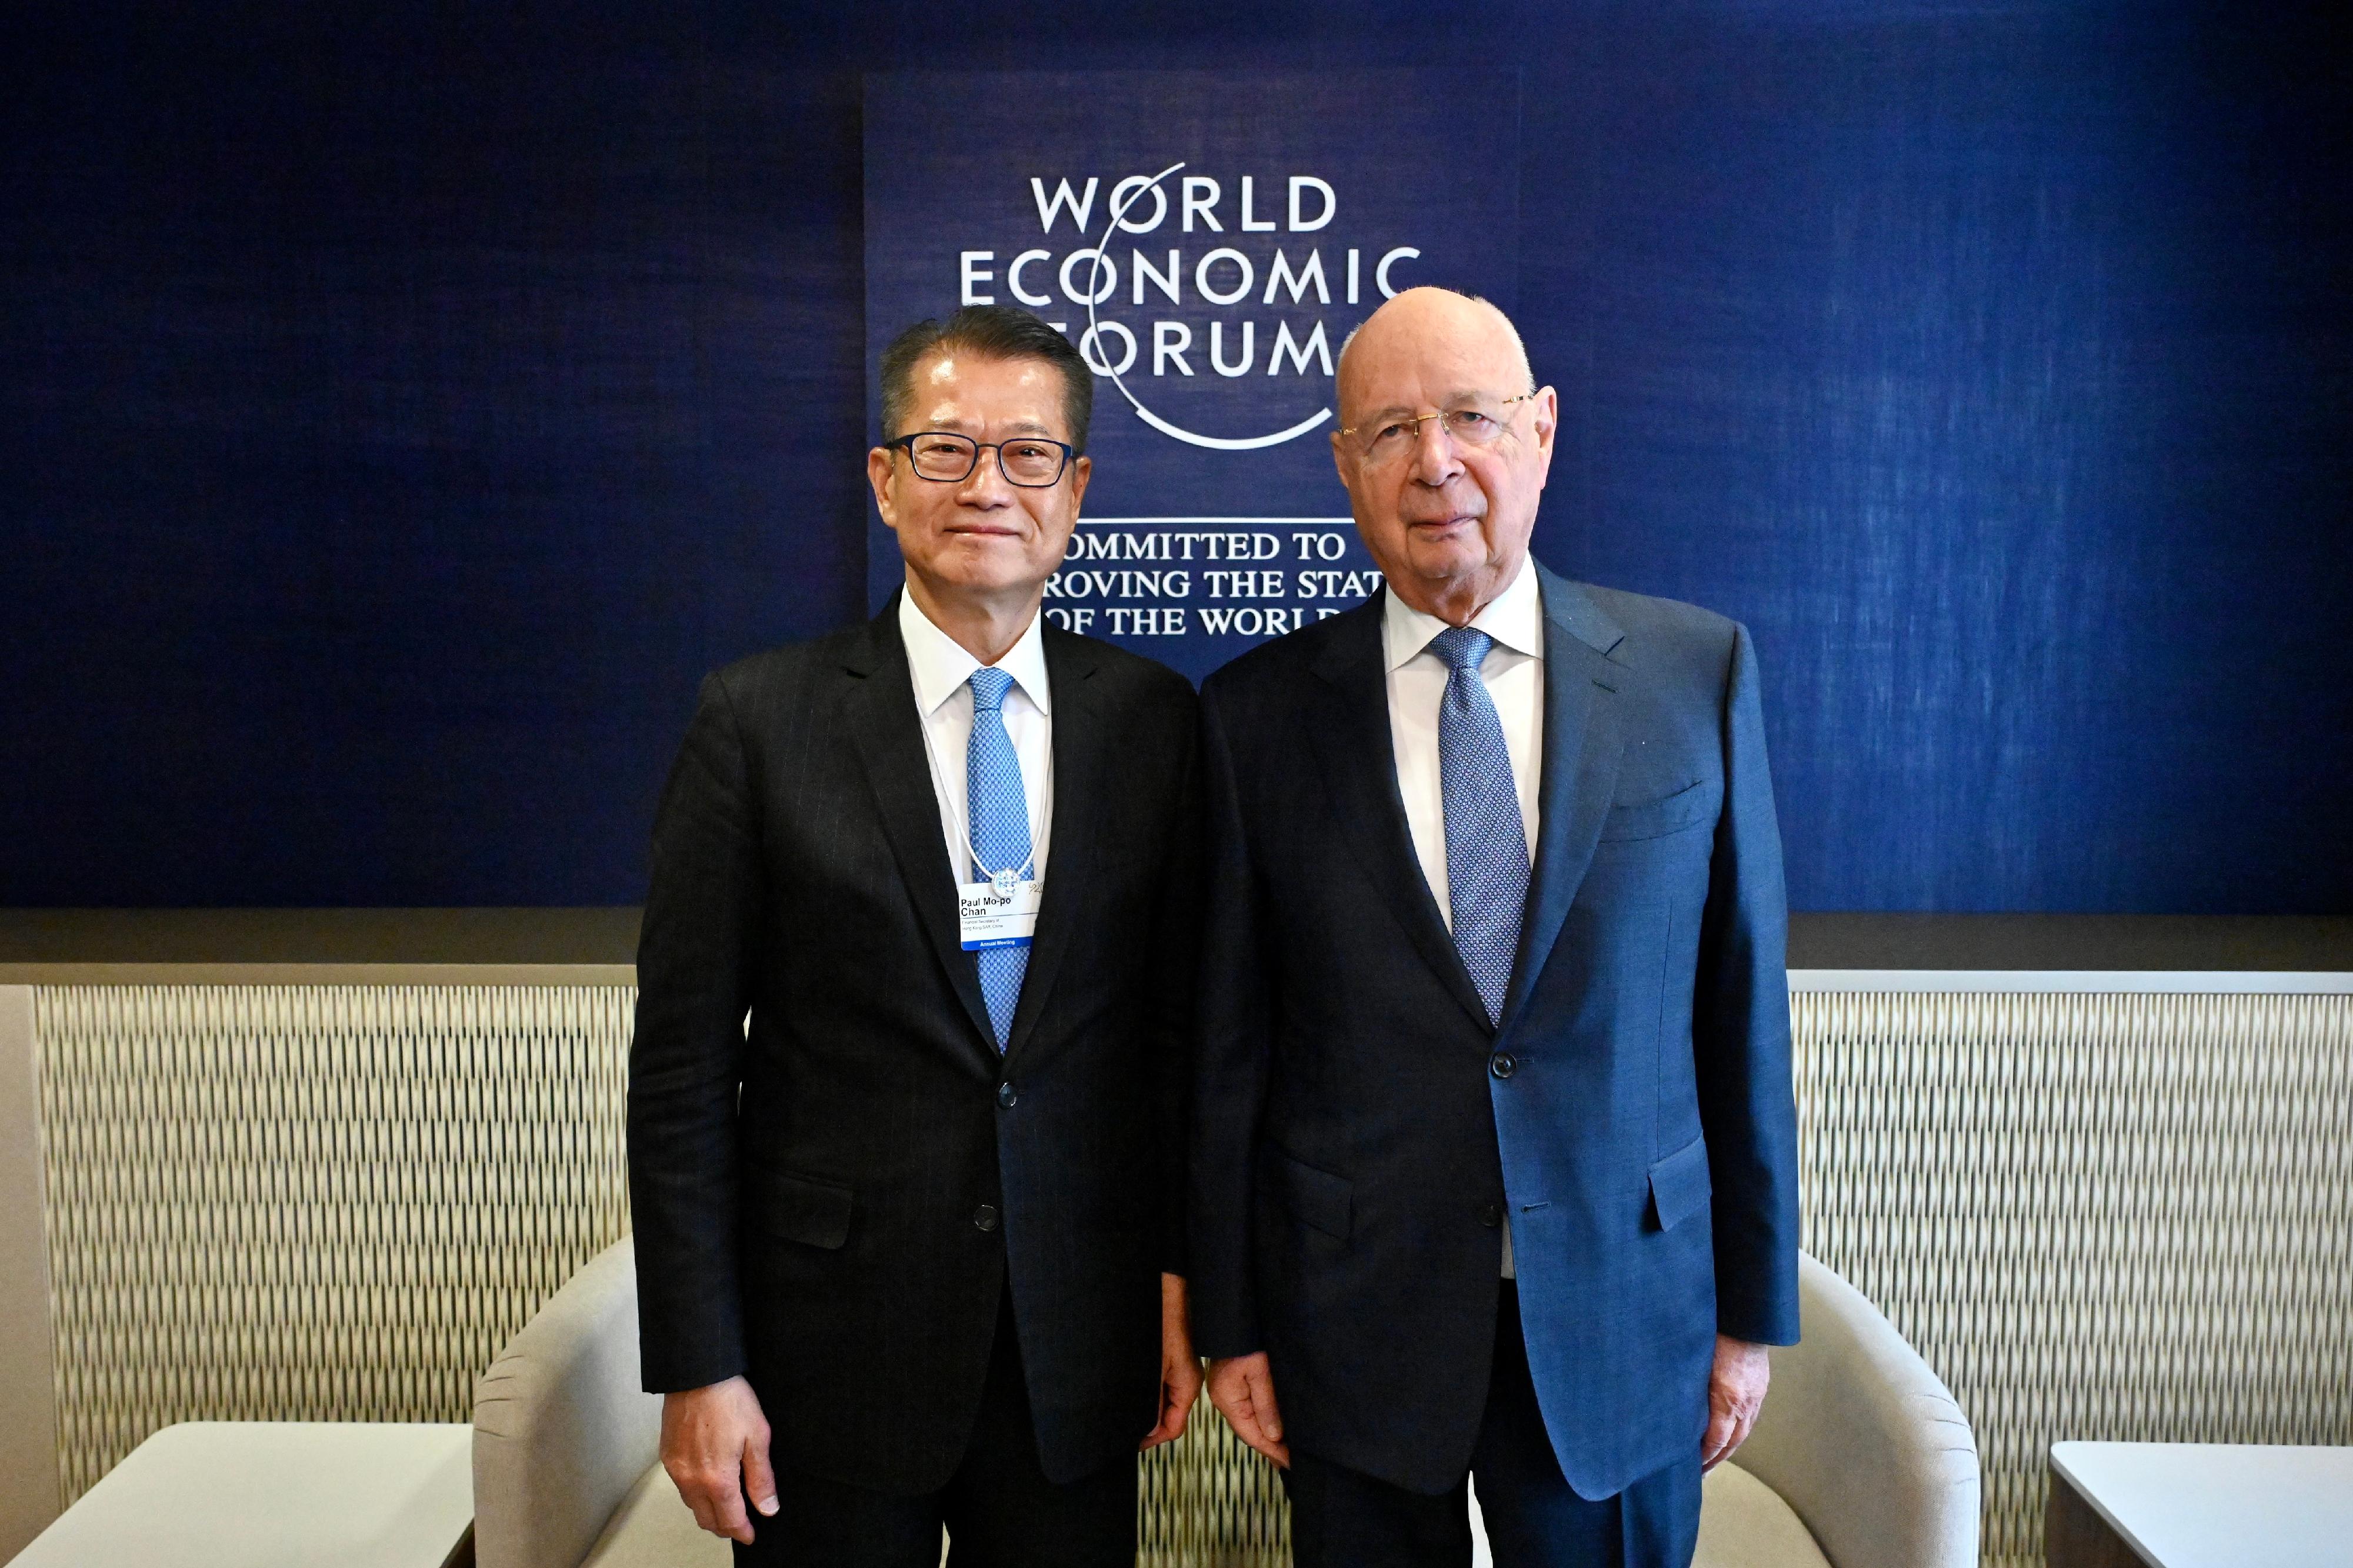 The Financial Secretary, Mr Paul Chan, continued to attend the World Economic Forum (WEF) Annual Meeting at Davos, Switzerland, yesterday (January 18, Davos time). Photo shows Mr Chan (left) meeting with the founder and executive chairman of the WEF, Professor Klaus Schwab (right).